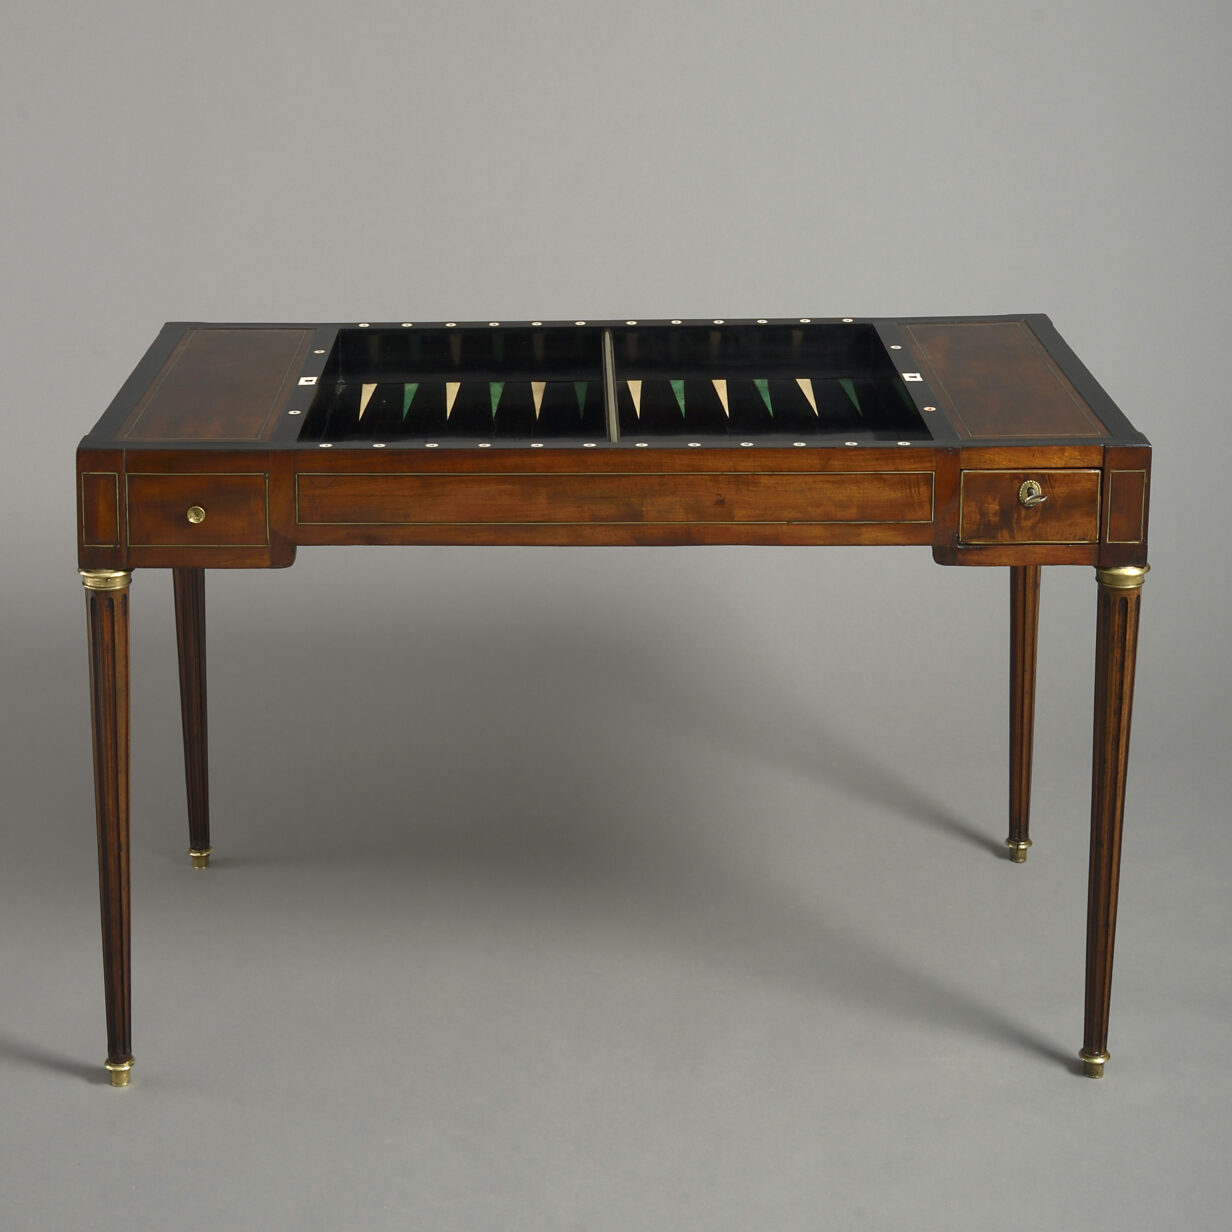 Late 18th Century Louis XVI Period Tric Trac Games Table